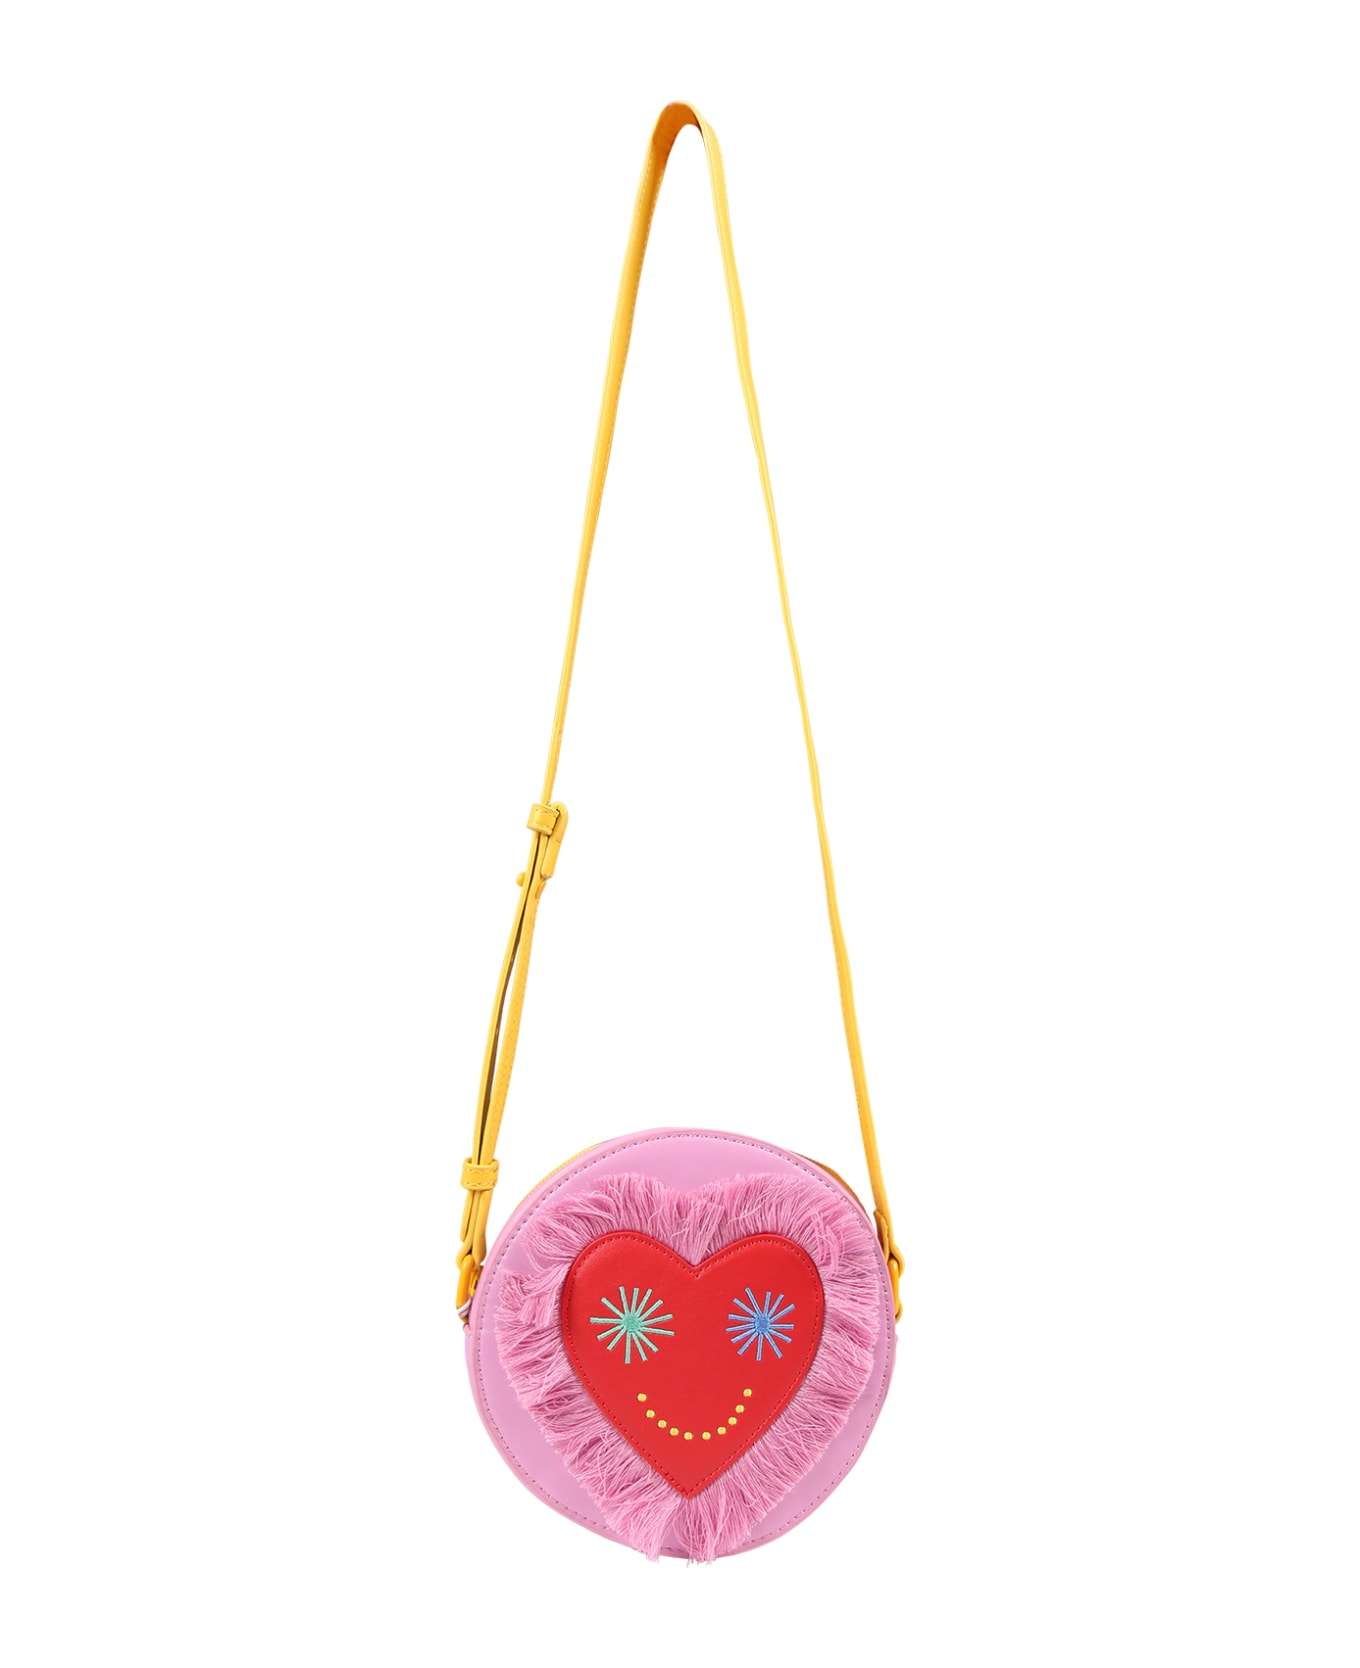 Stella McCartney Kids Pink Bag For Girl With Heart - Multicolor